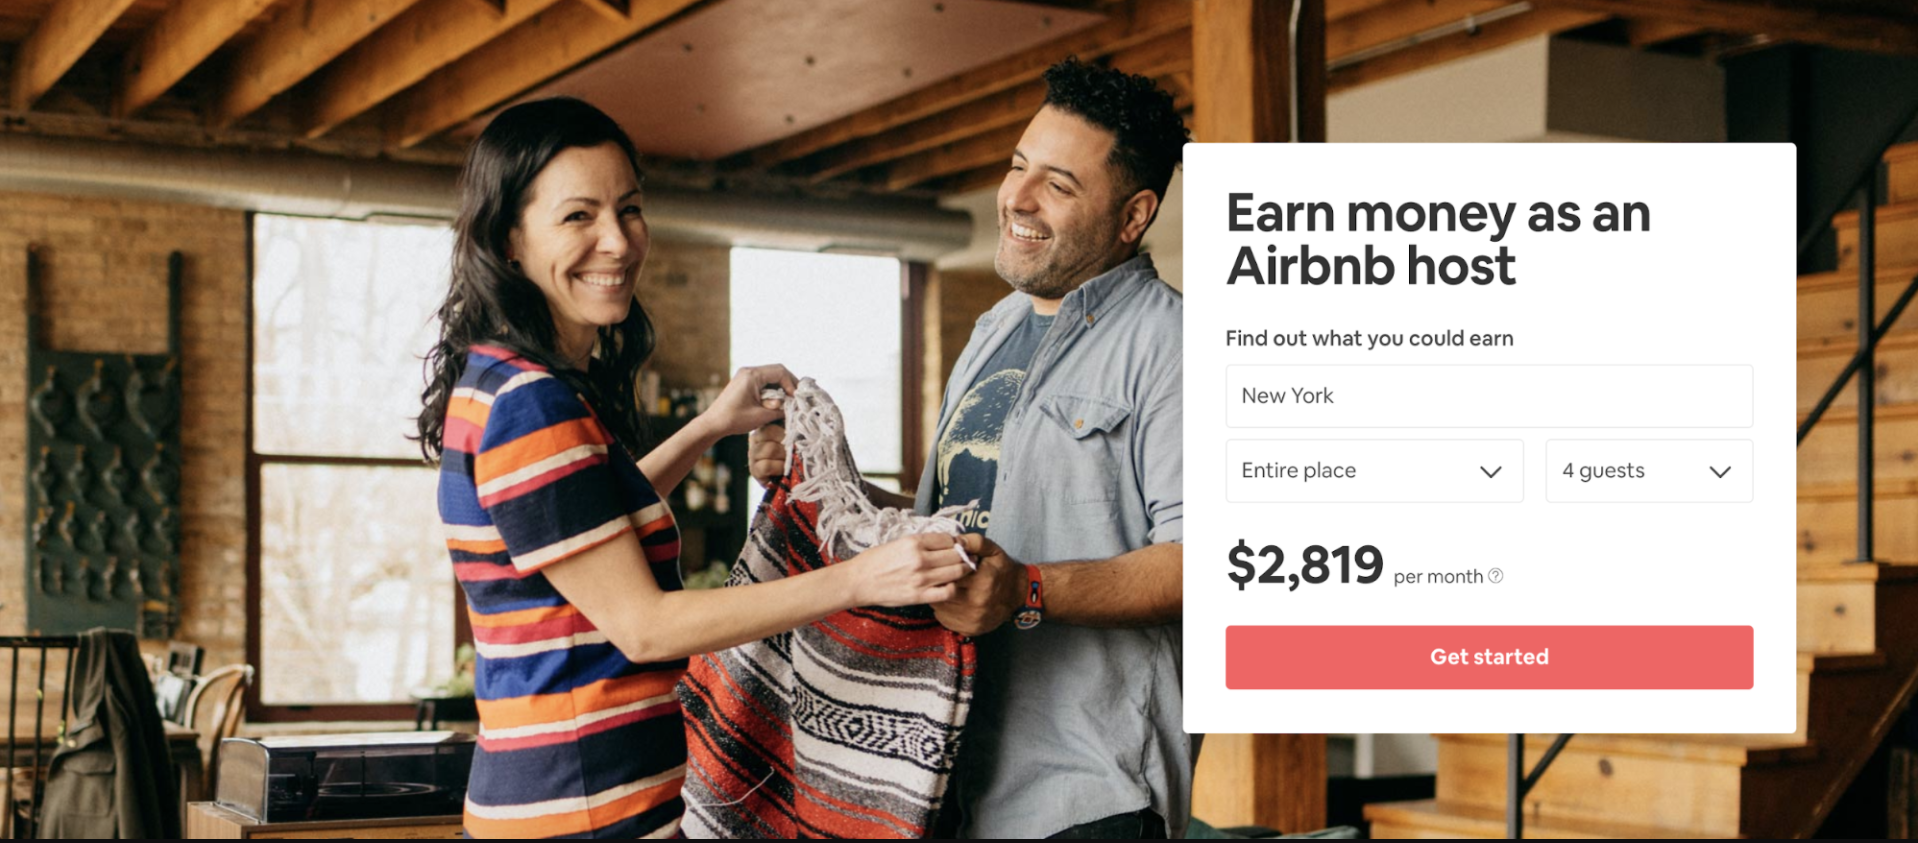 Airbnb landing page as an exmample